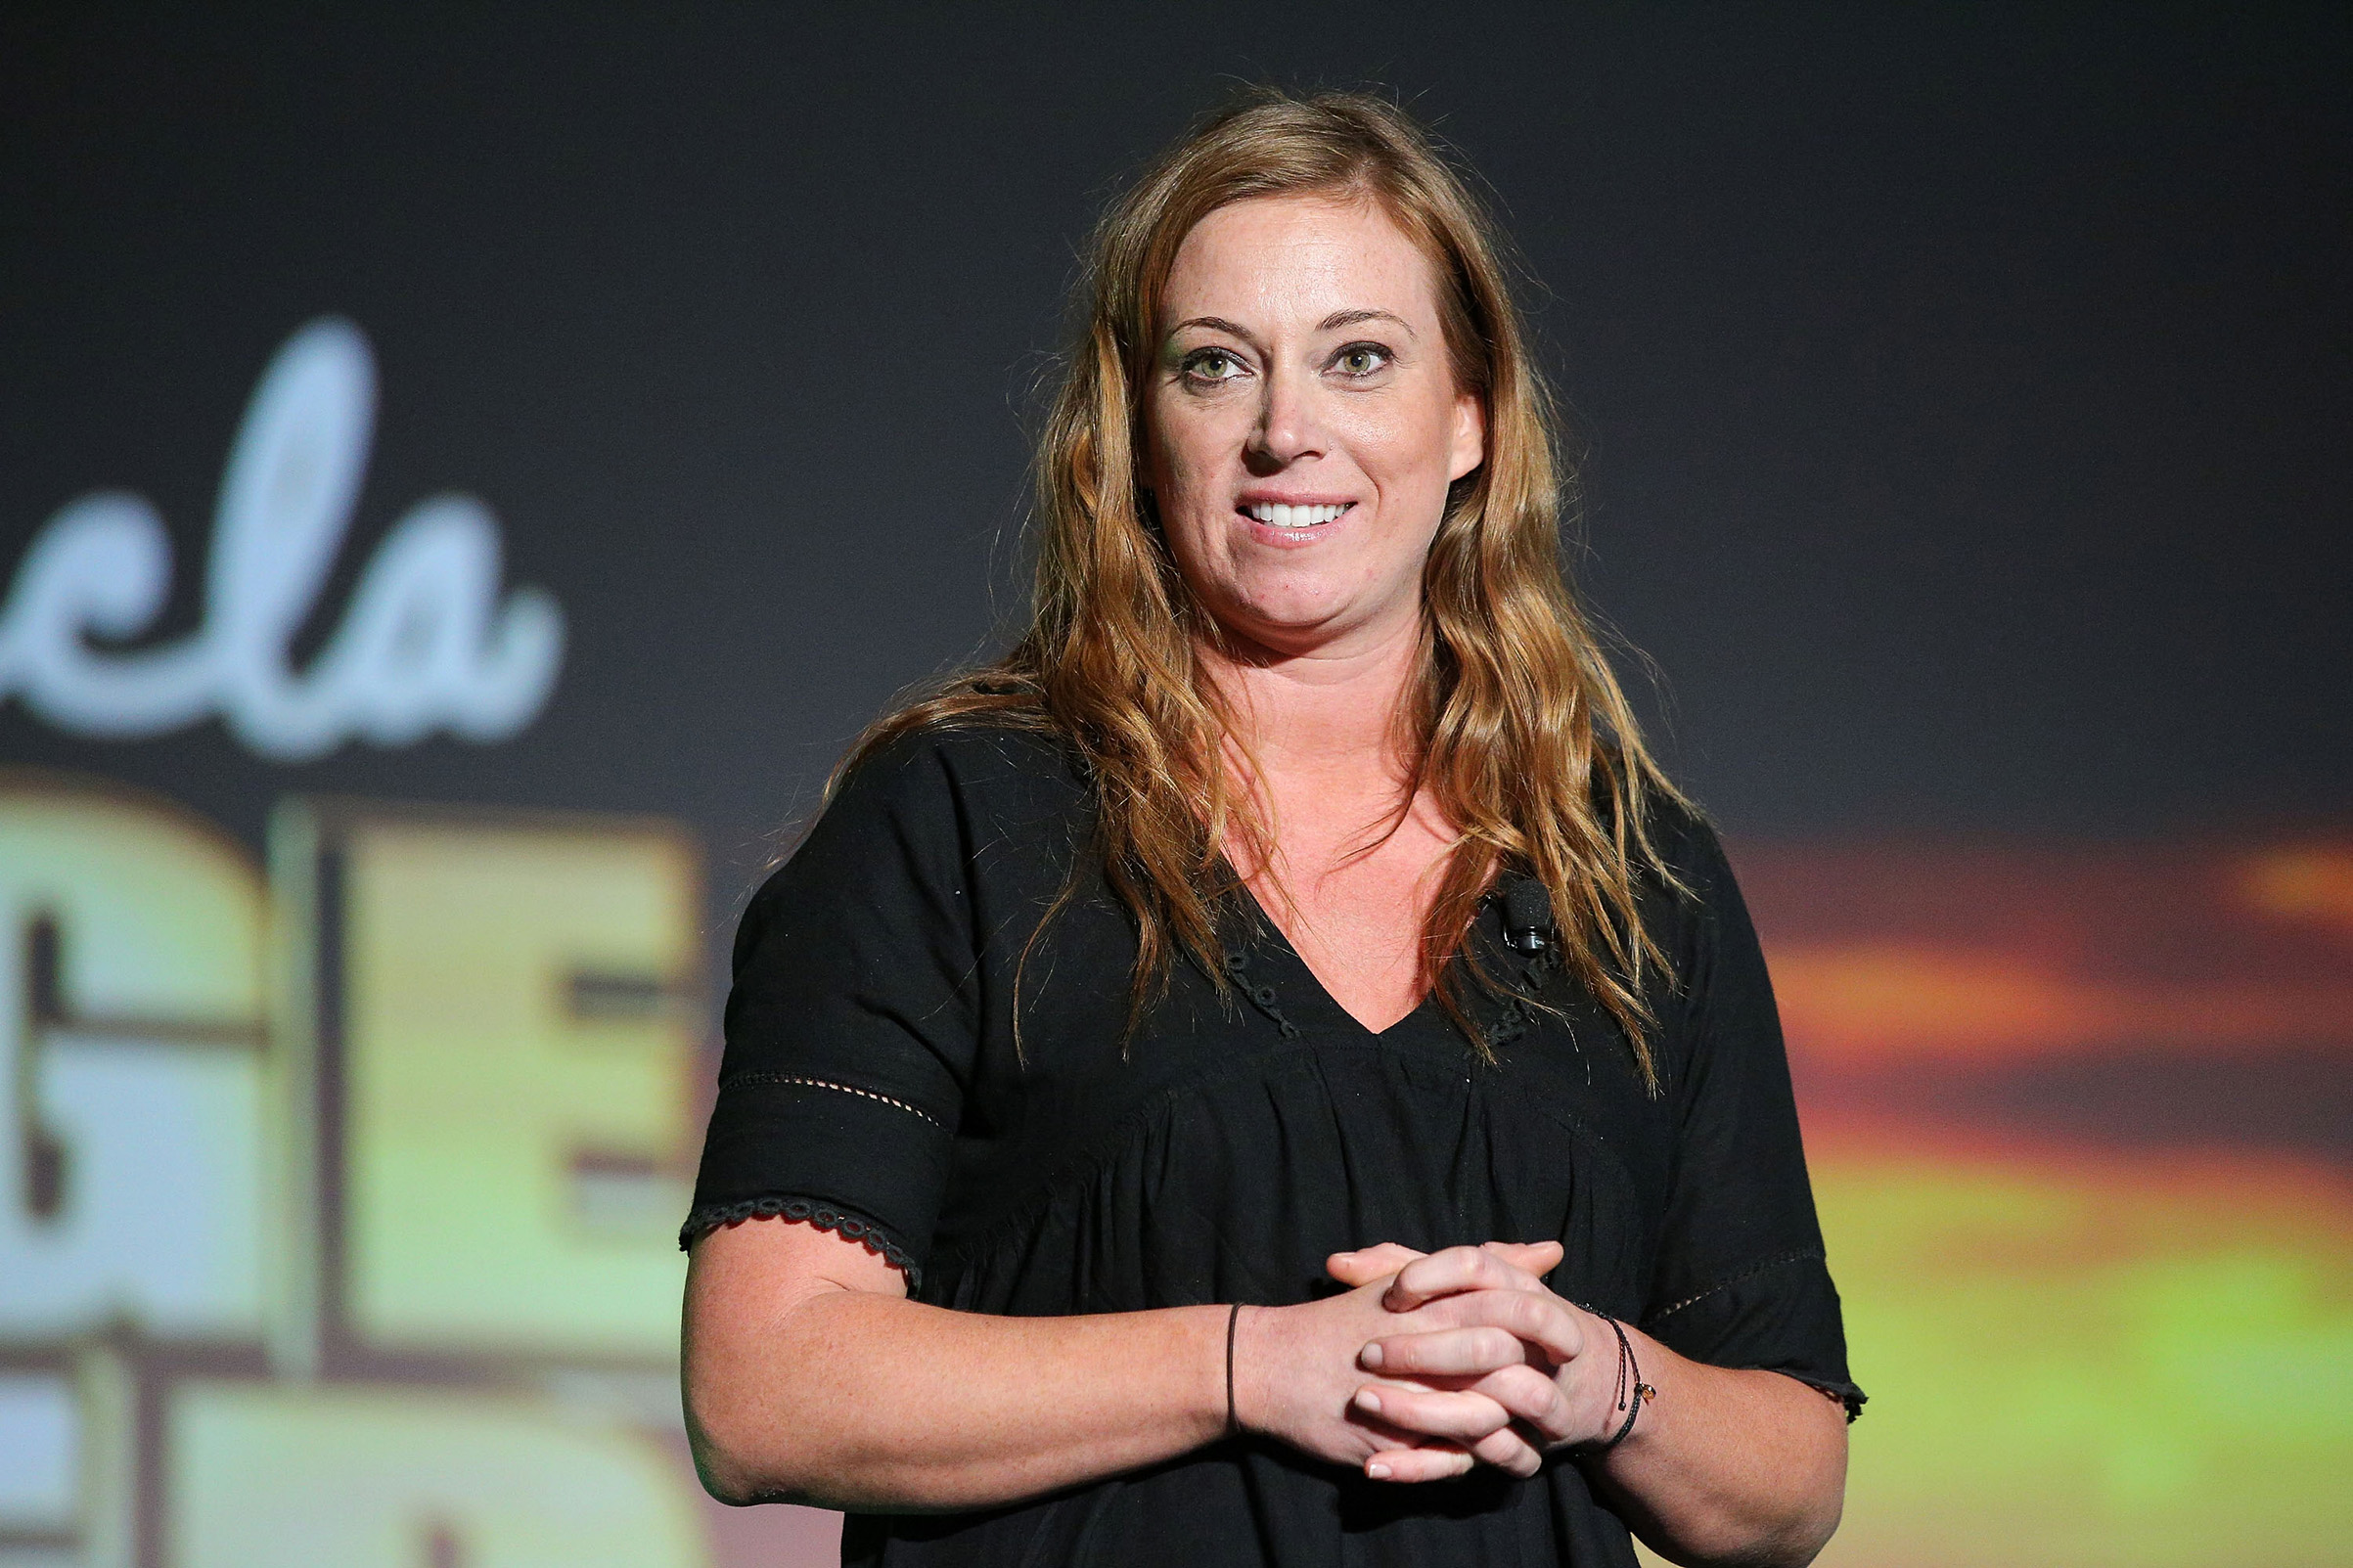 More Than Me Founder Katie Meyler speaks at the 2015 PTTOW! Annual Summit at Terrenea Resort in Rancho Palos Verdes, Calif. (Imeh Akpanudosen—Getty Images)